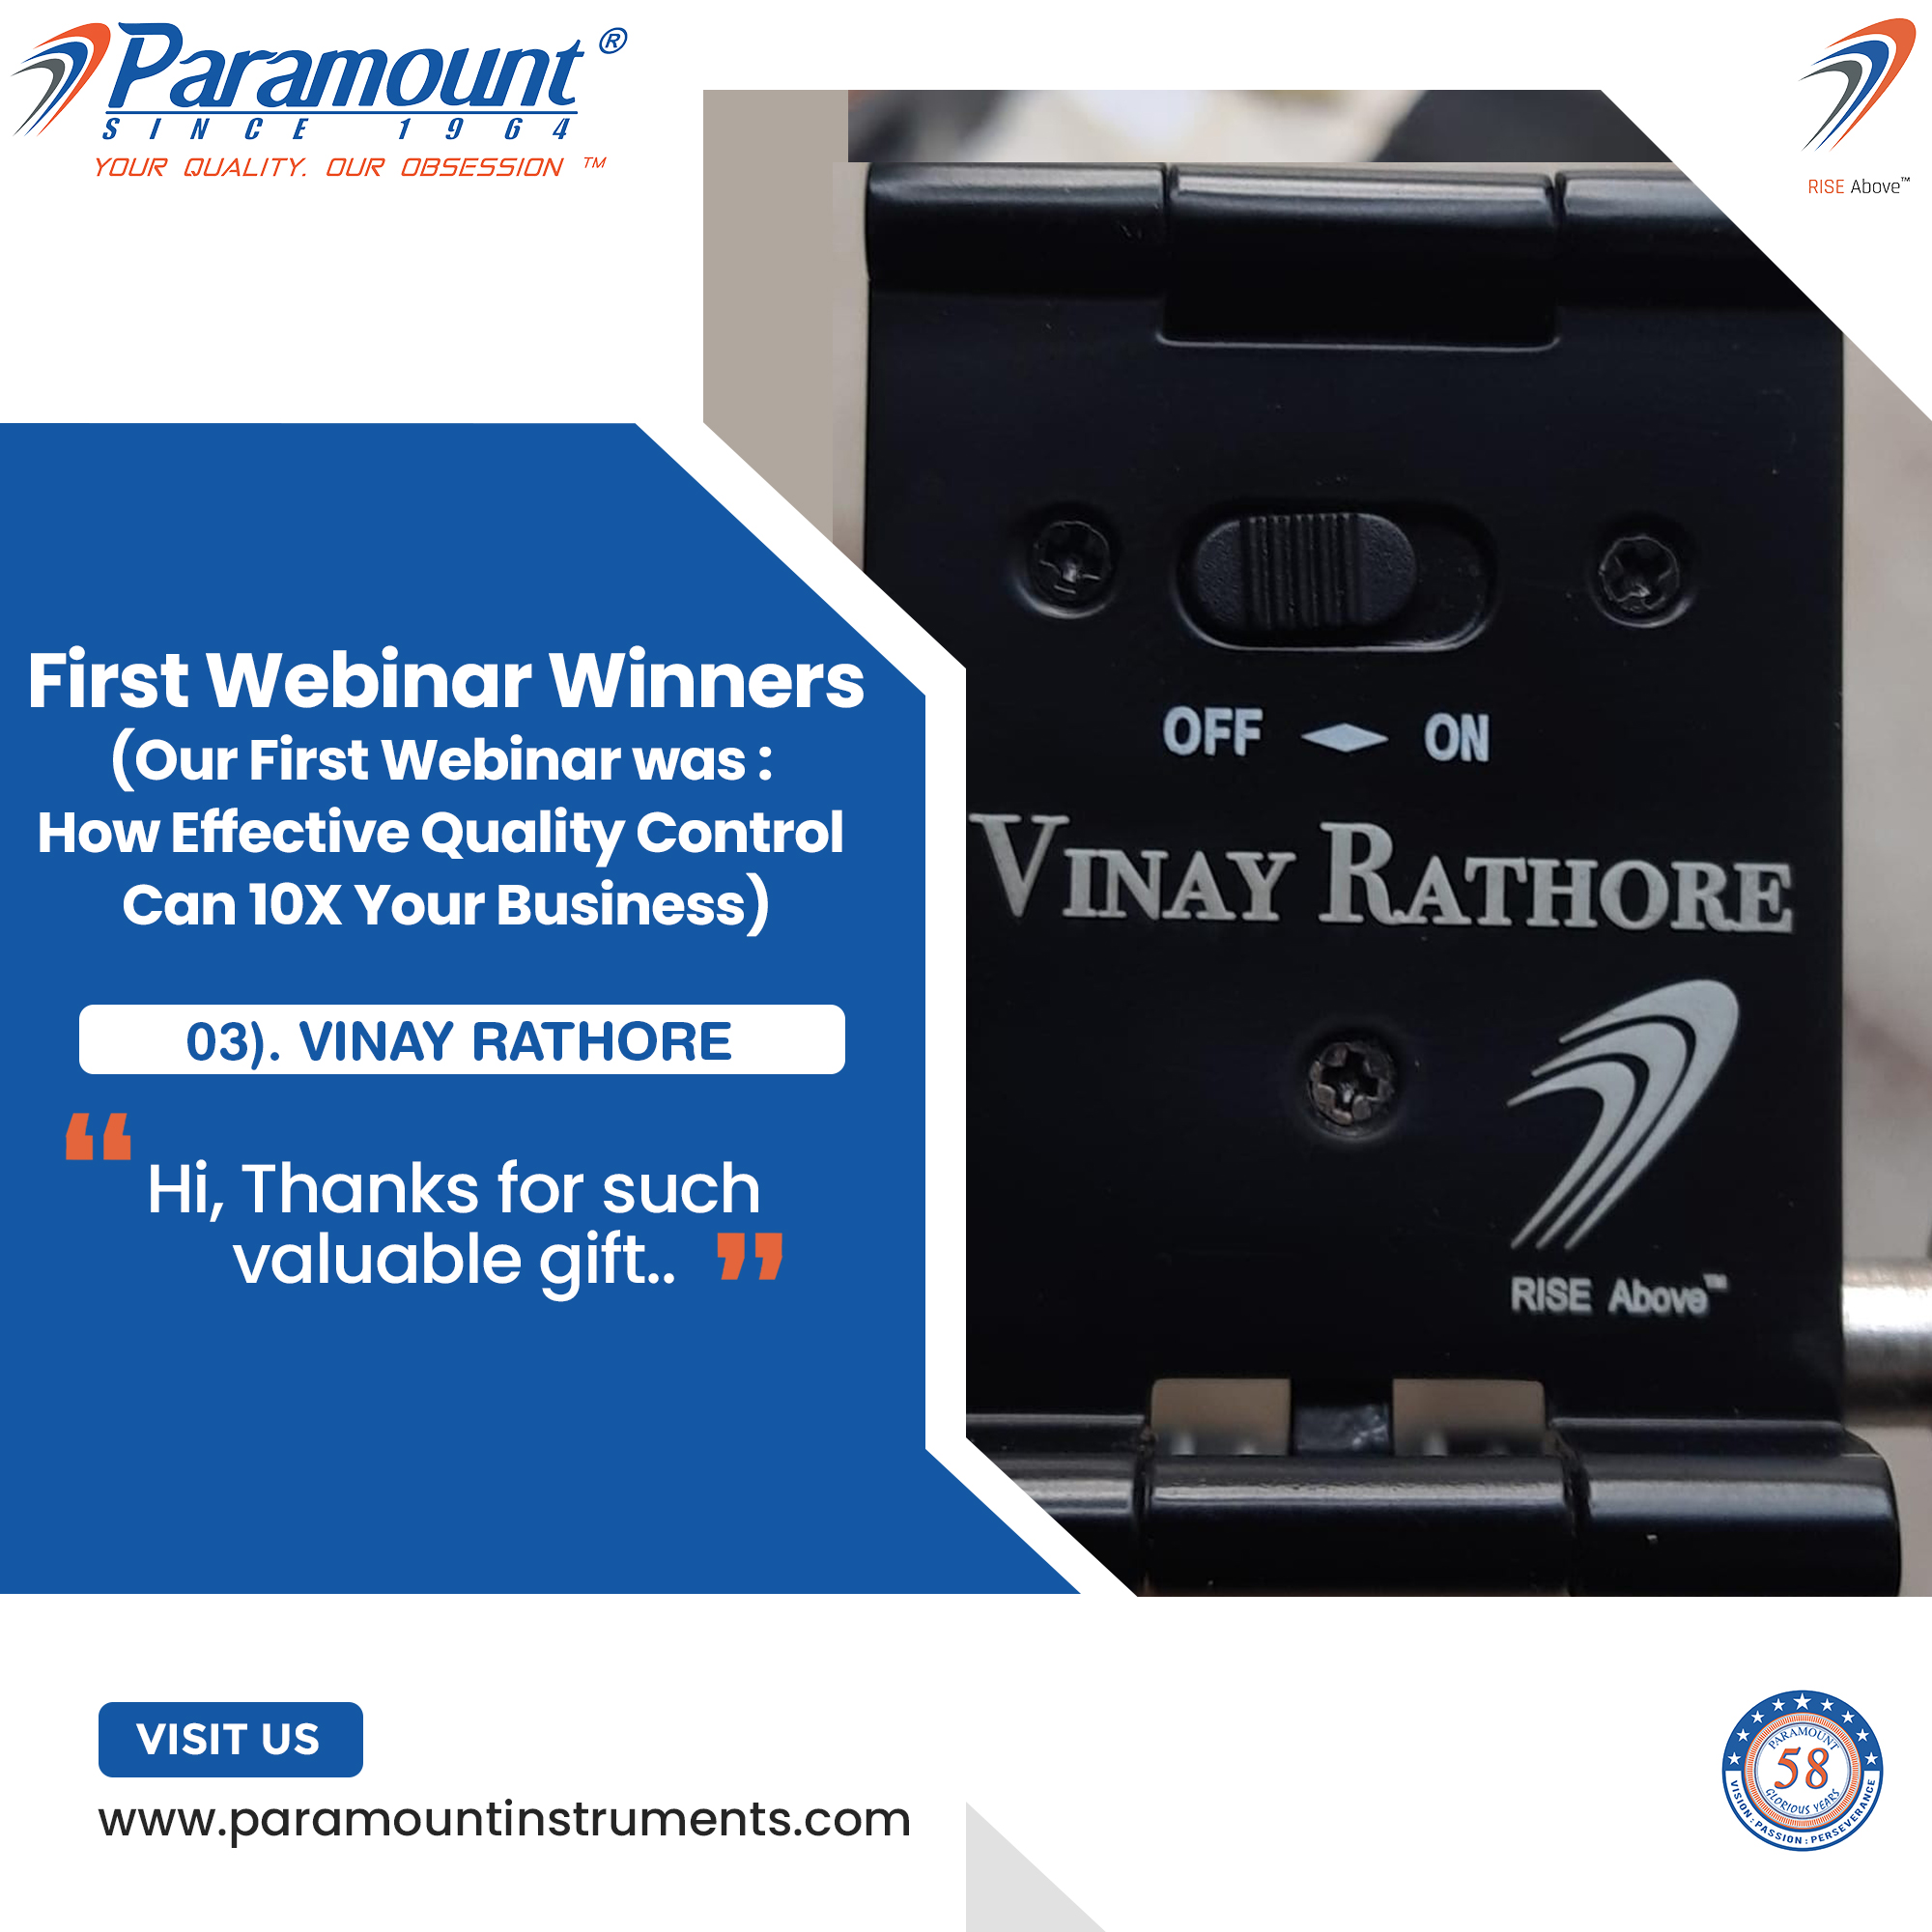 7 Paramount ©

/I NV CF 1 9 6 4

YOUR QUALITY. OUR OBSESSION ™

        
     
  
    
  
 

First Webinar Winners
(Our First Webinar was :
How Effective Quality Control A \

Can 10X Your Business)

03). VINAY RATHORE

Hi, Thanks for such
valuable gift..

OFF = ON

ssia